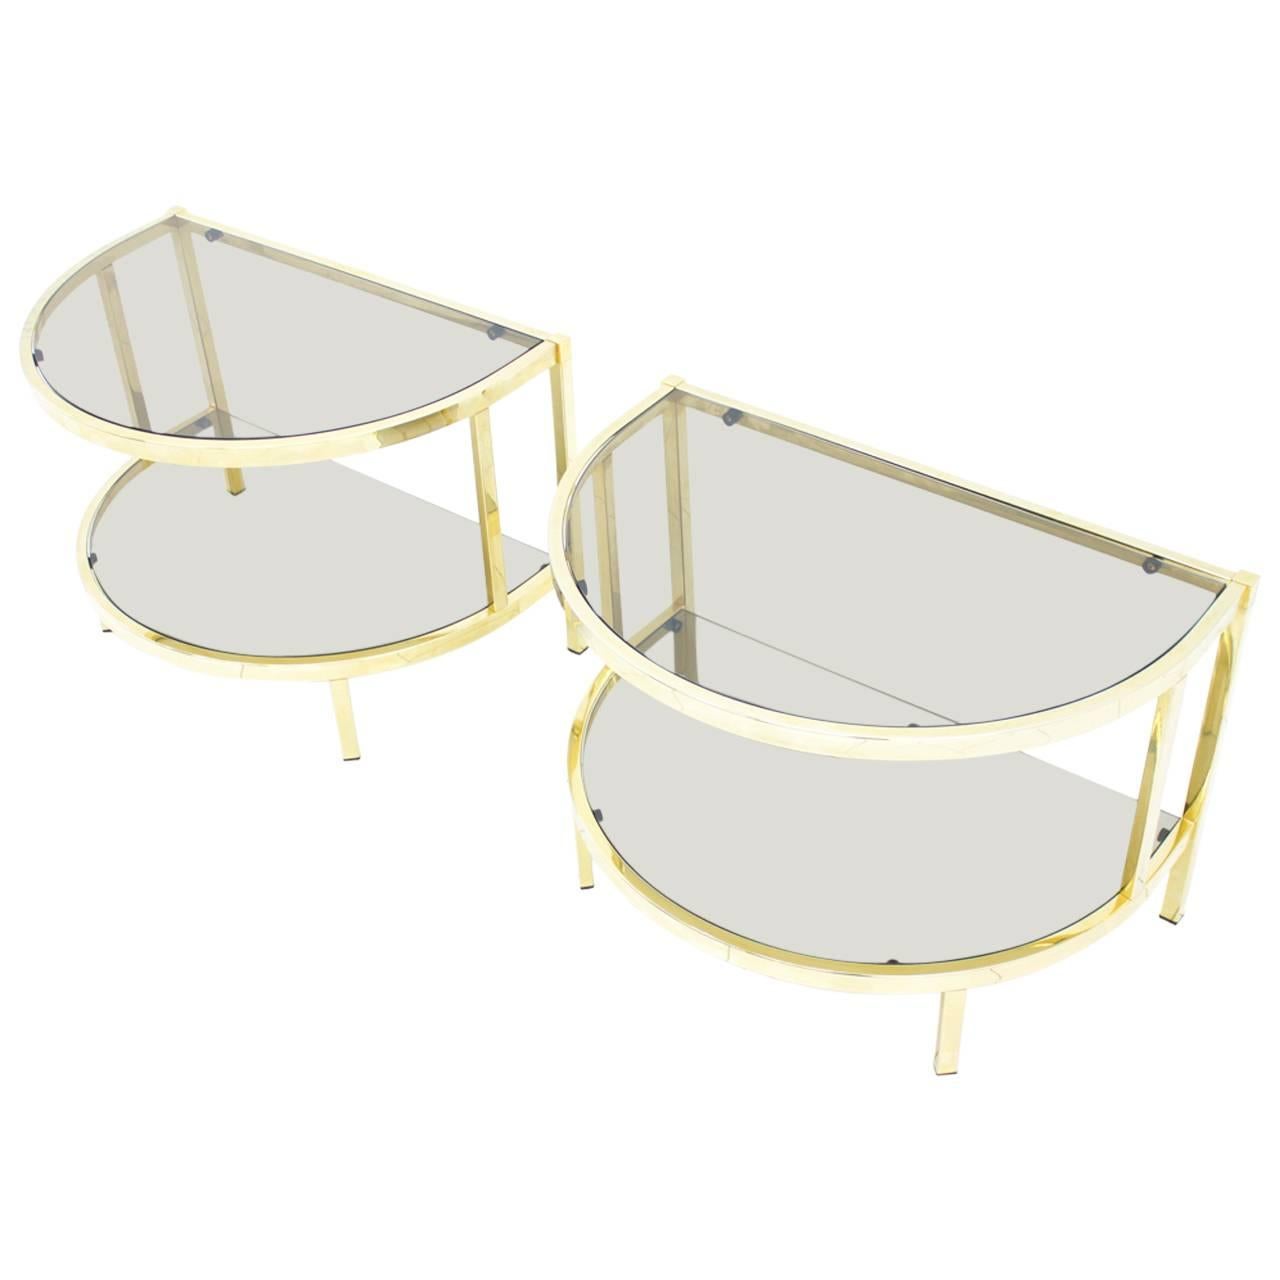 Pair of Brass and Glass Bed Side Tables, 1970s